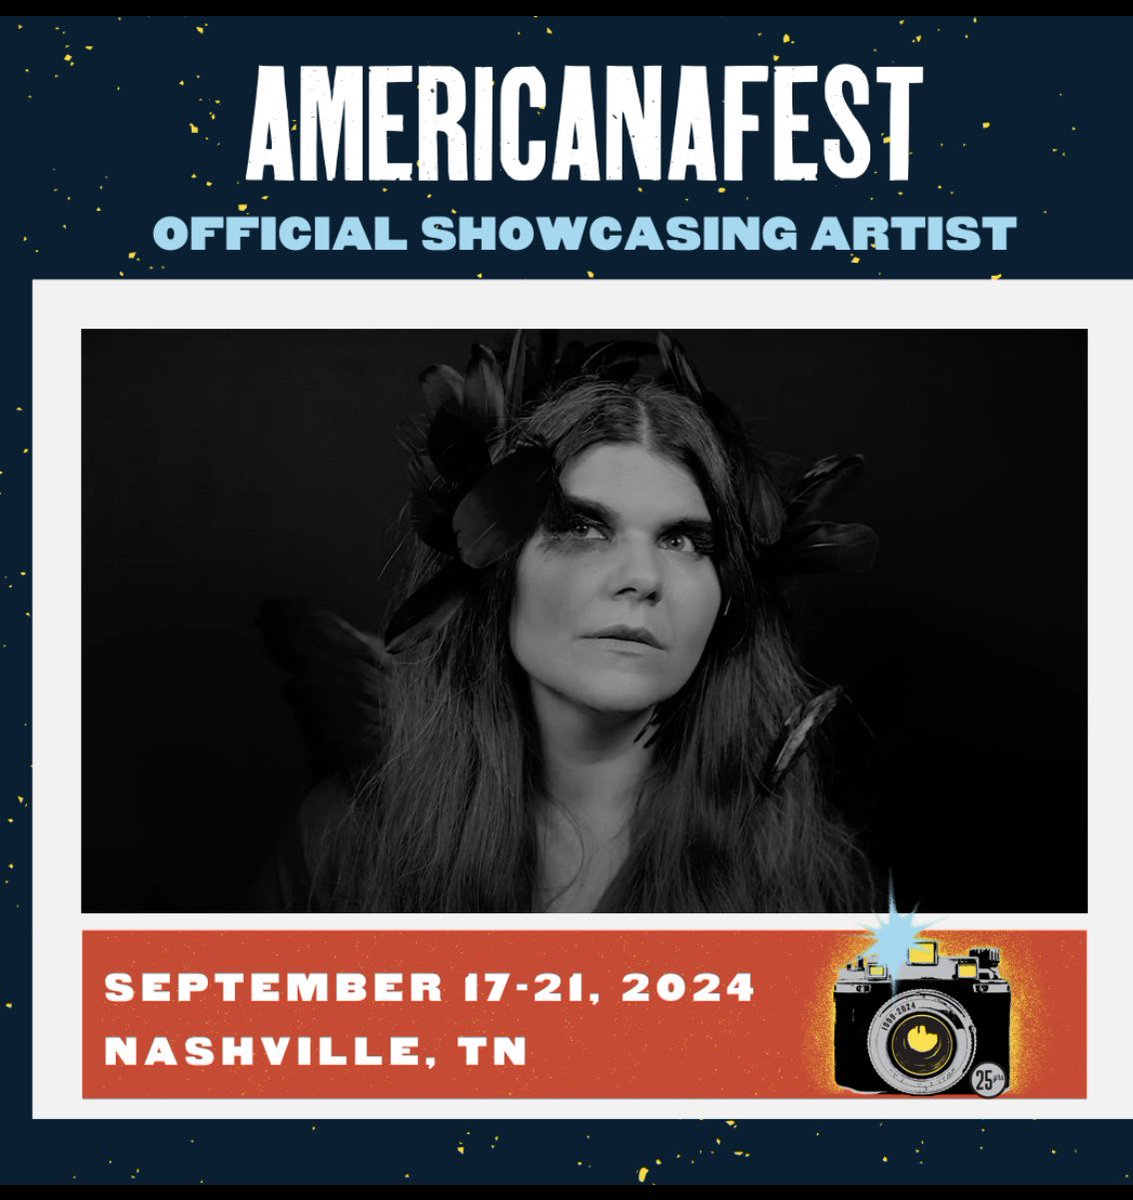 📣Big Announcement!! - I’m excited to share that I’ll be going to Nashville later this year!!! ✈️🎶 This will be my first time playing @americanafest 🤠 I am honoured to have been invited to showcase in September! Stay tuned for more updates! Can’t wait! #Americanafest